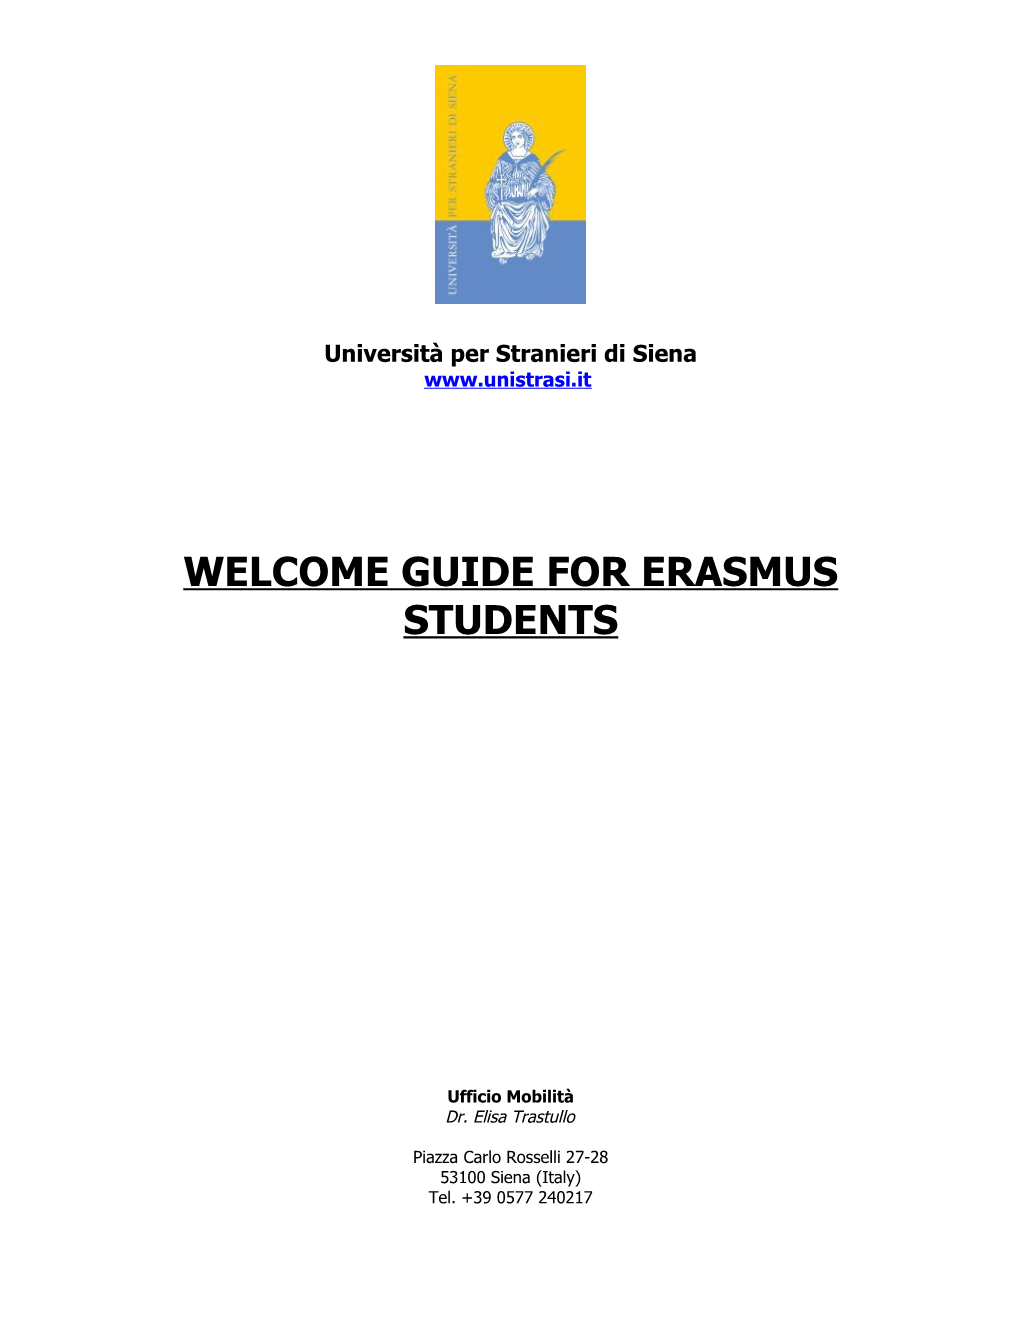 Welcome Guide for Erasmus Students